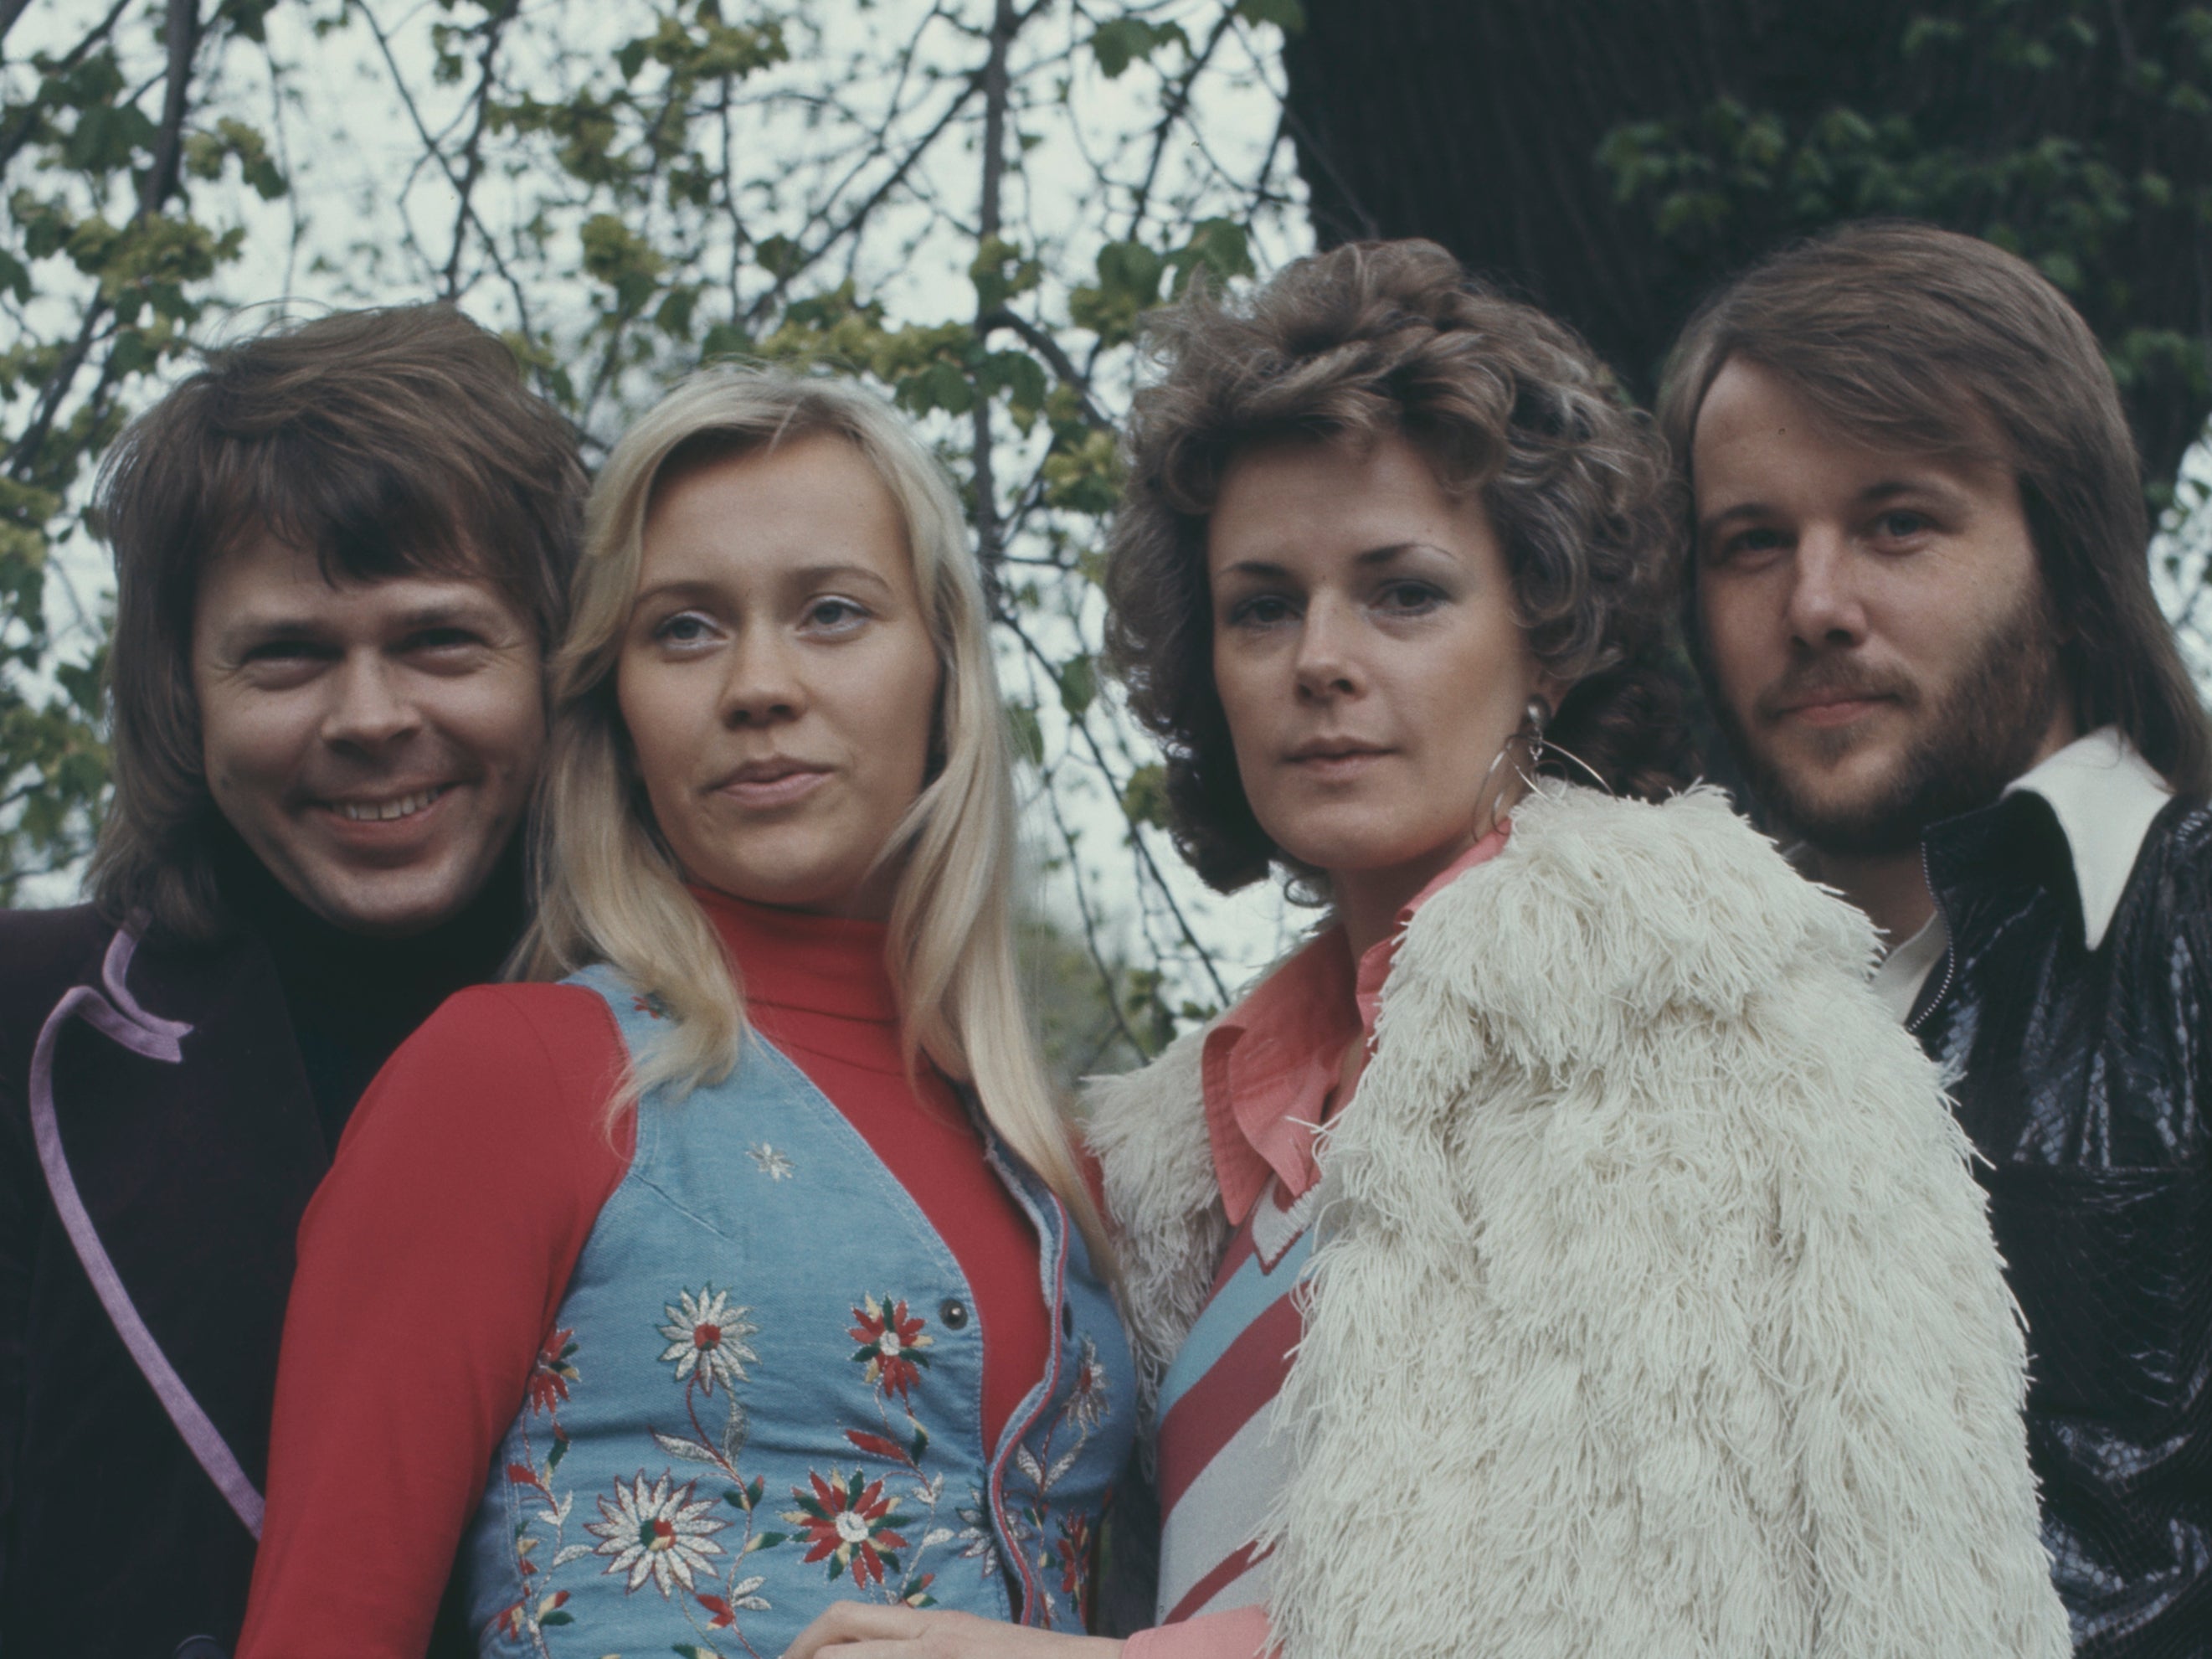 Abba pictured in 1974